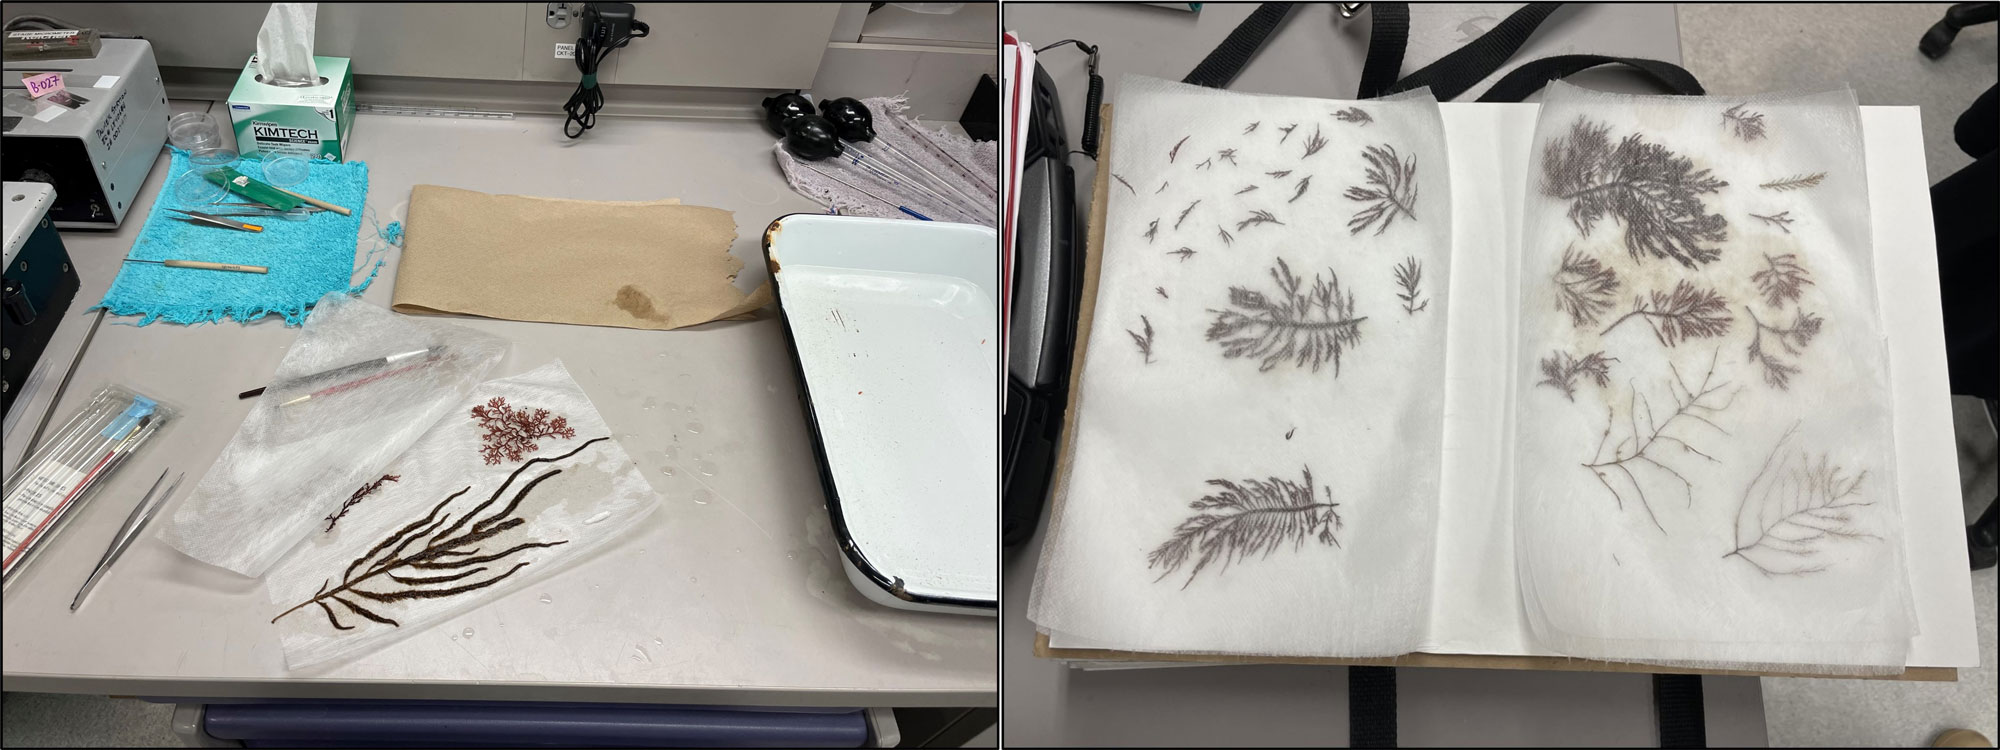 Pair of images showing feathery red and brown algal fronds artfully arranged between wax paper (left) and  fiber sheets (right).